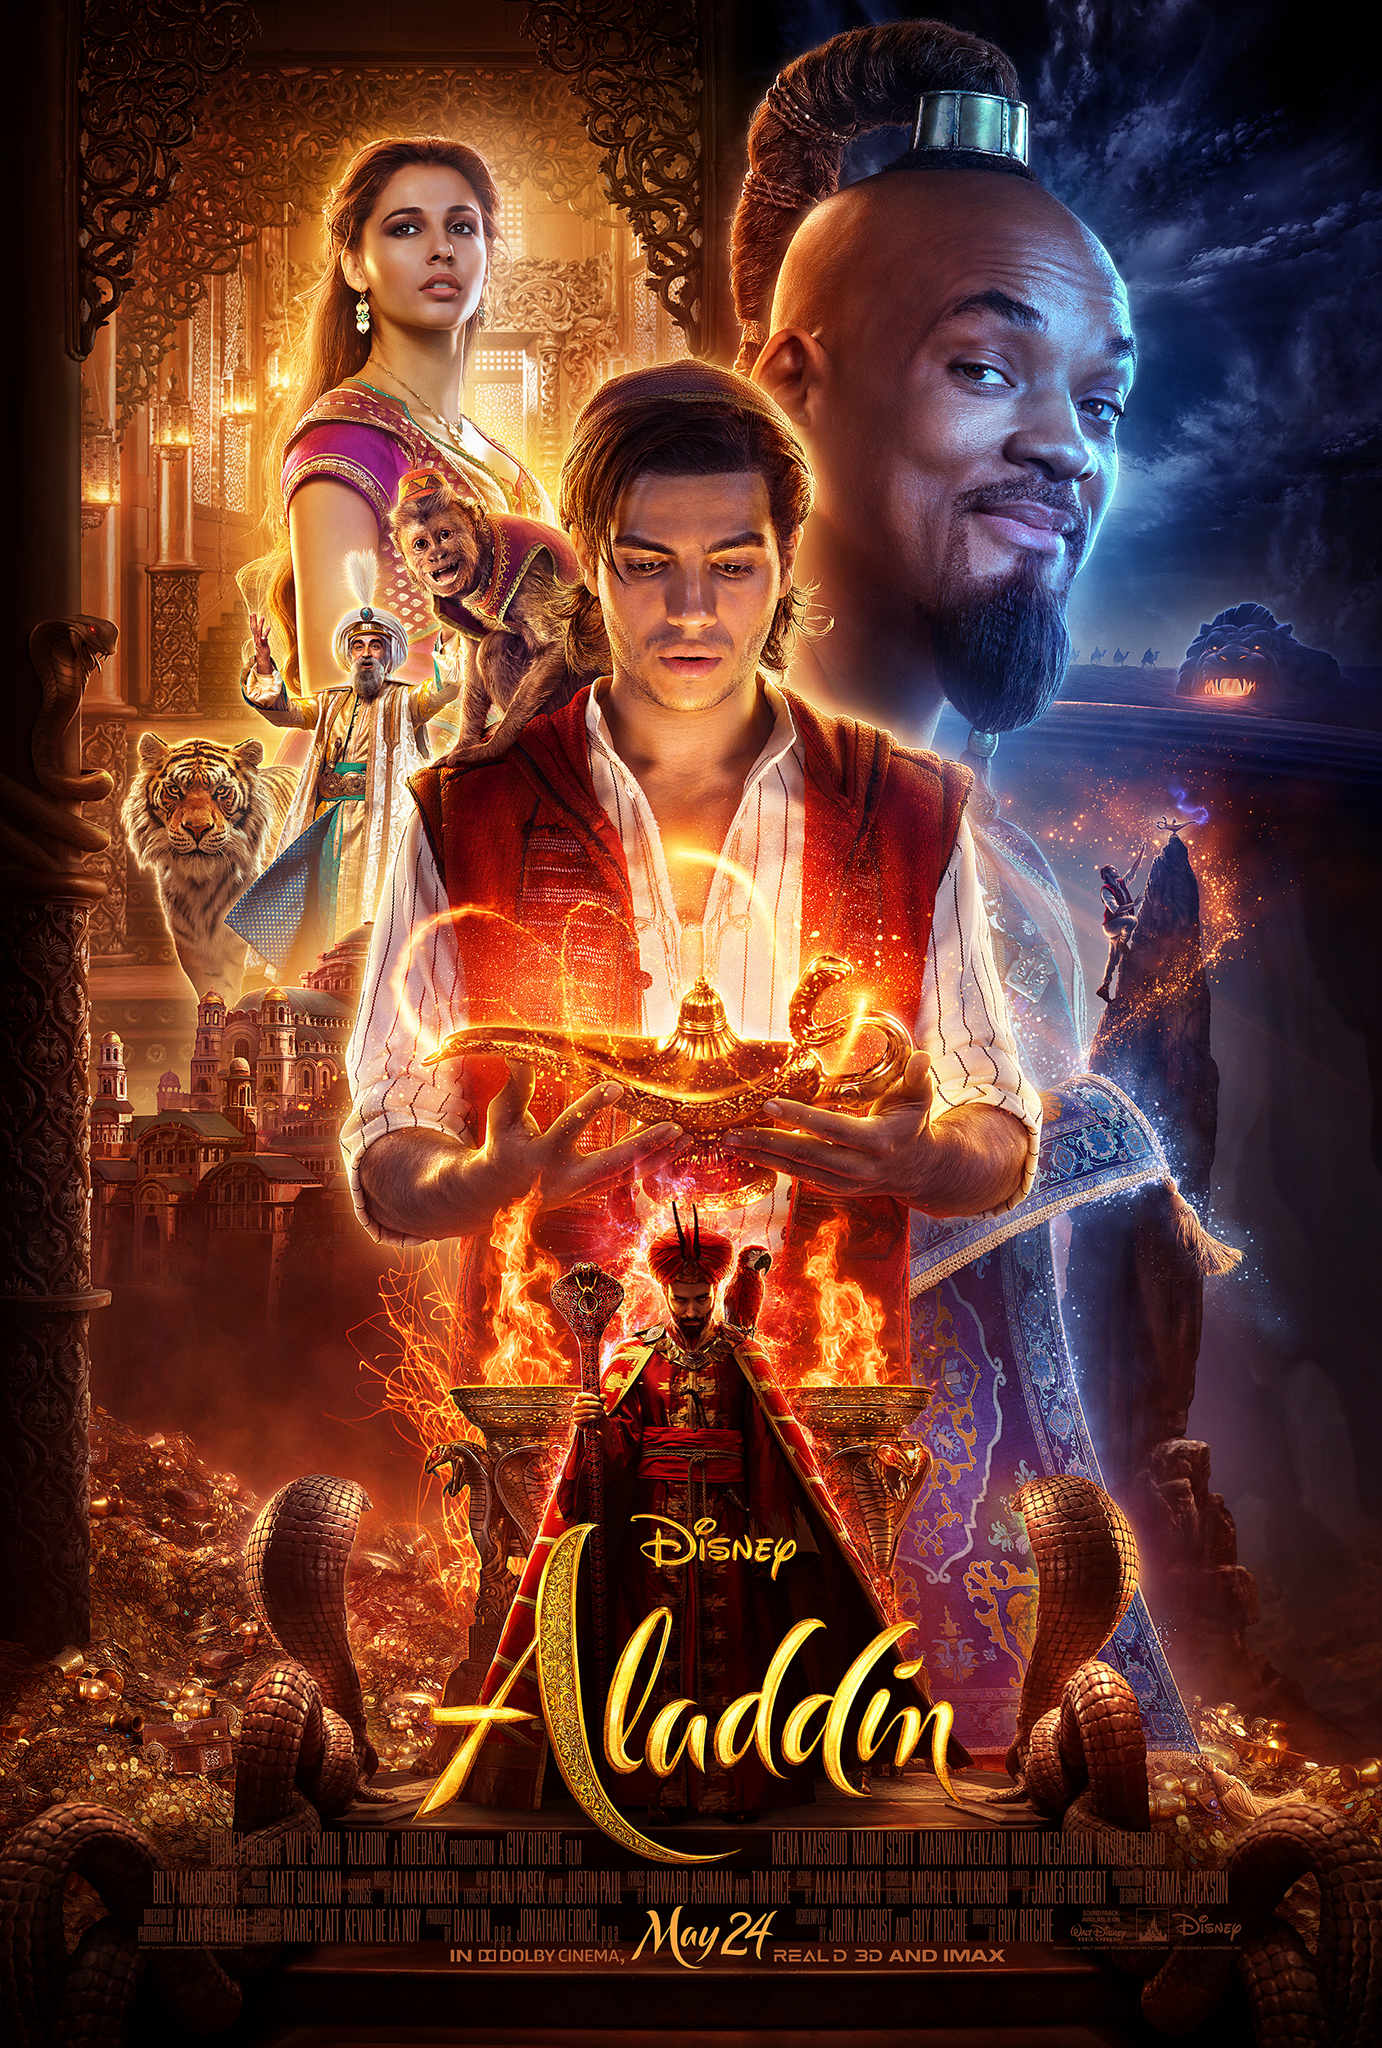 Aladdin Movie Review: Will Smith, Mena Massoud and Naomi Scott's film proves that old is gold